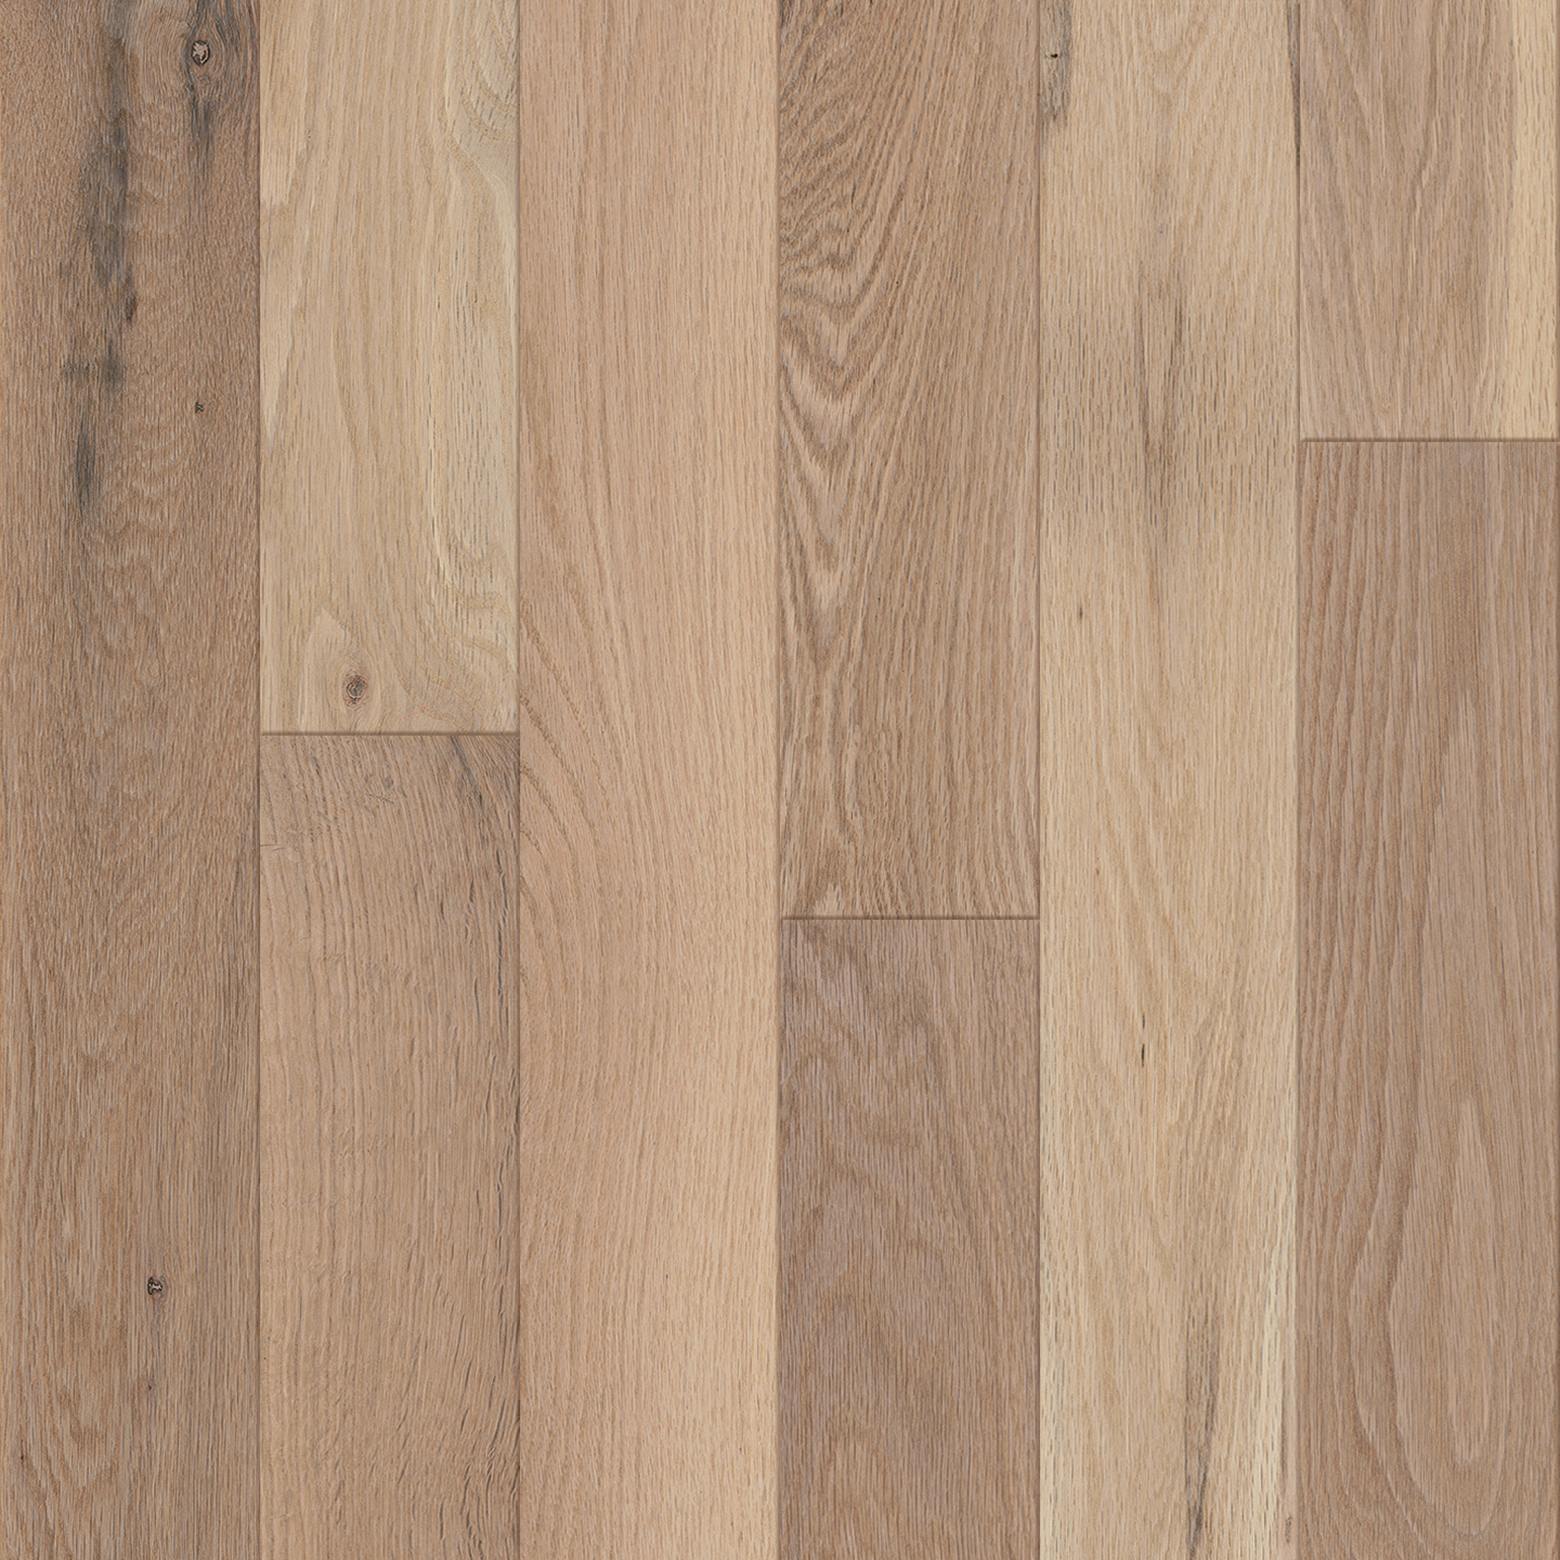 Bruce Dundee Plank 4 Inviting Warmth, Bruce Glue Down Hardwood Floors